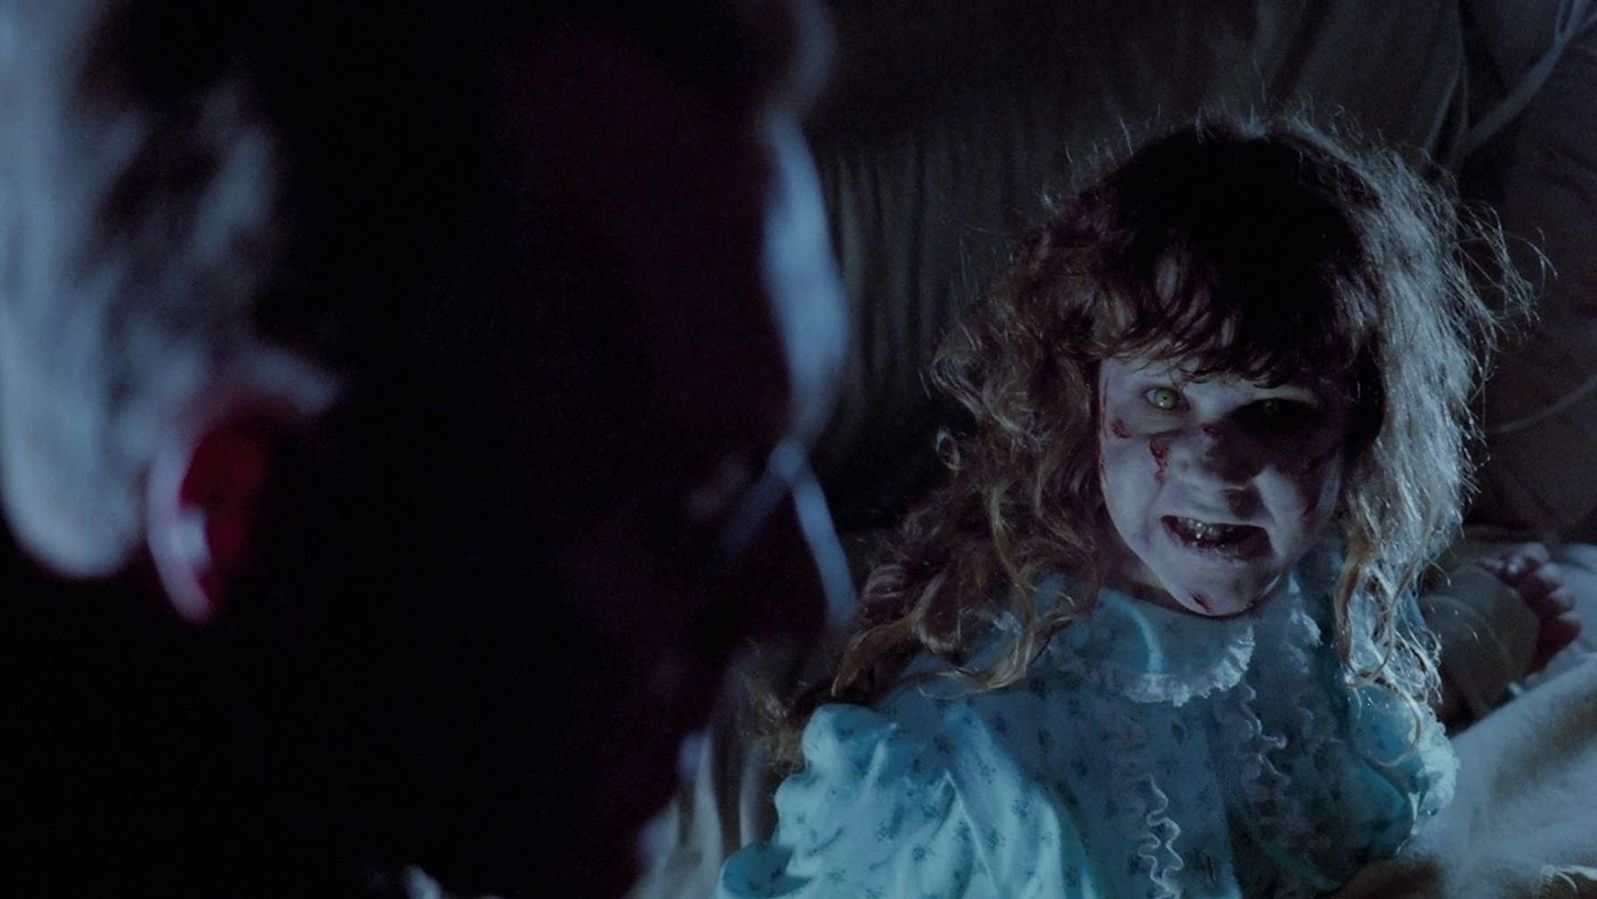 The girl in "The Exorcist" became possessed after playing with a Ouija board. 